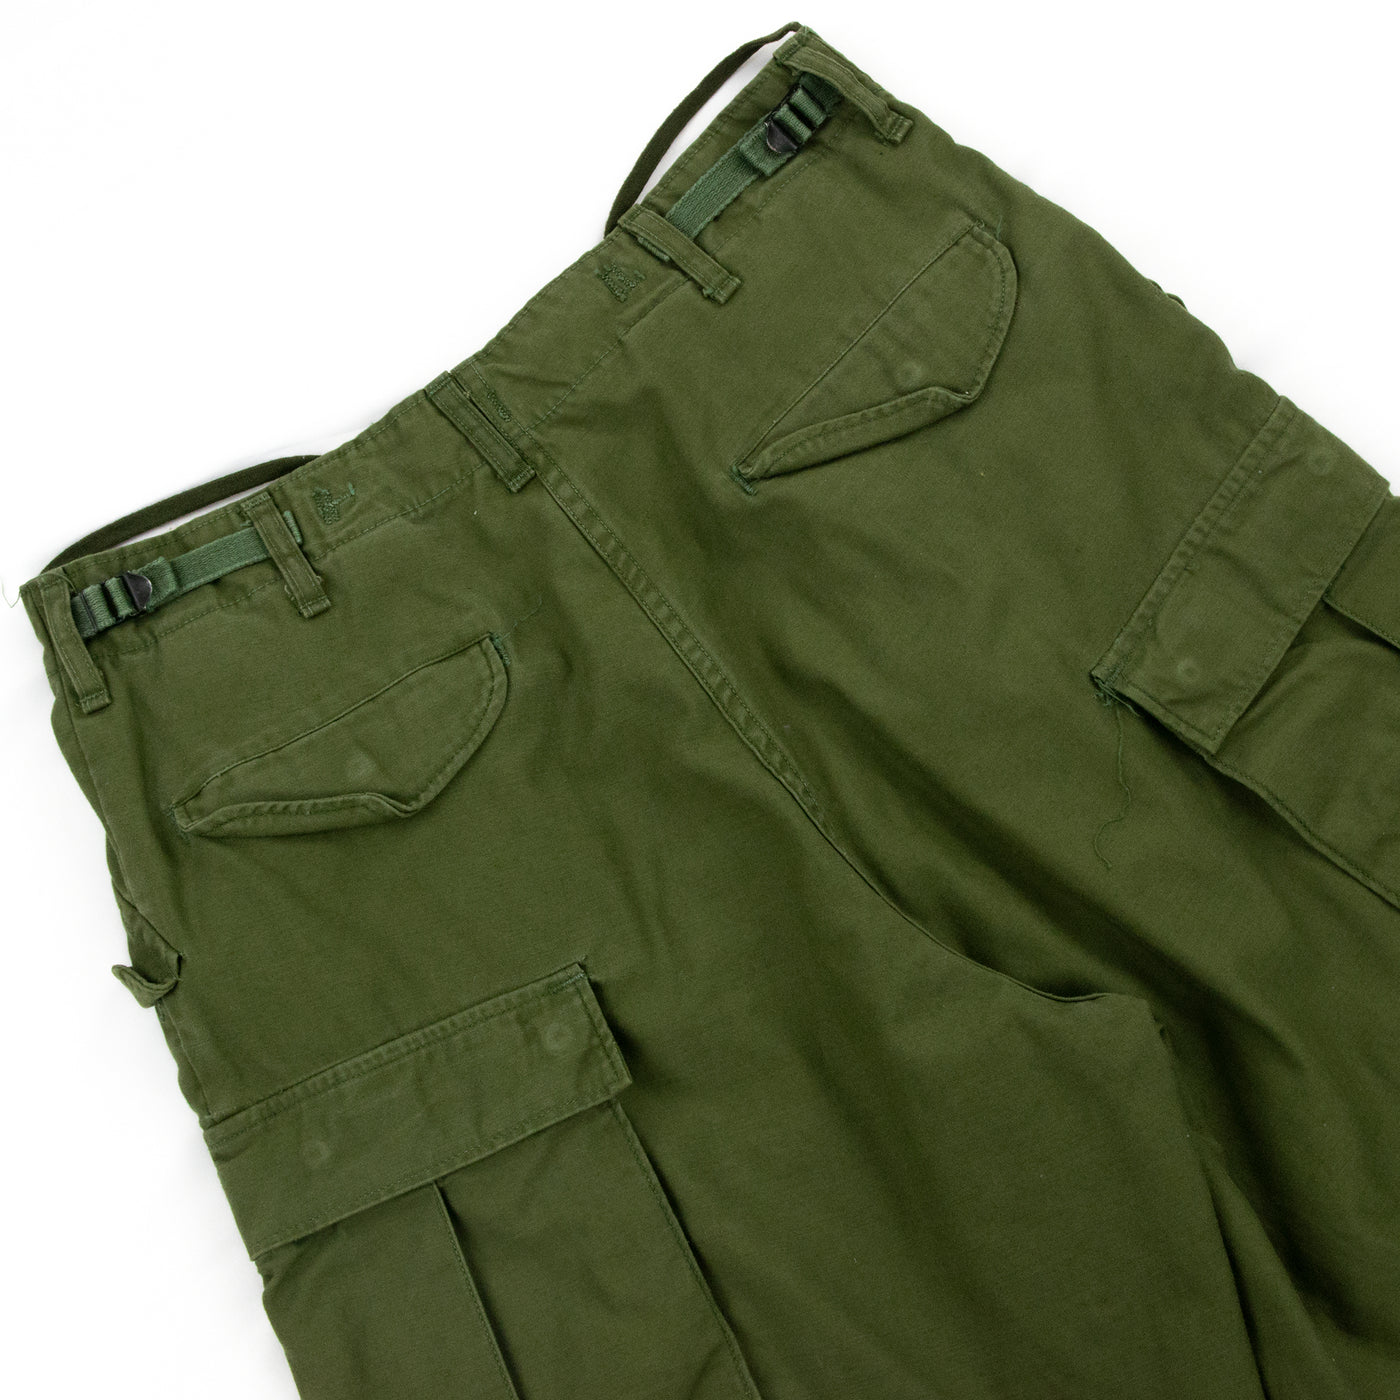 Vintage 1960's US Army M-1965 Cotton Sateen Military Field Trousers OG-107 - S Back